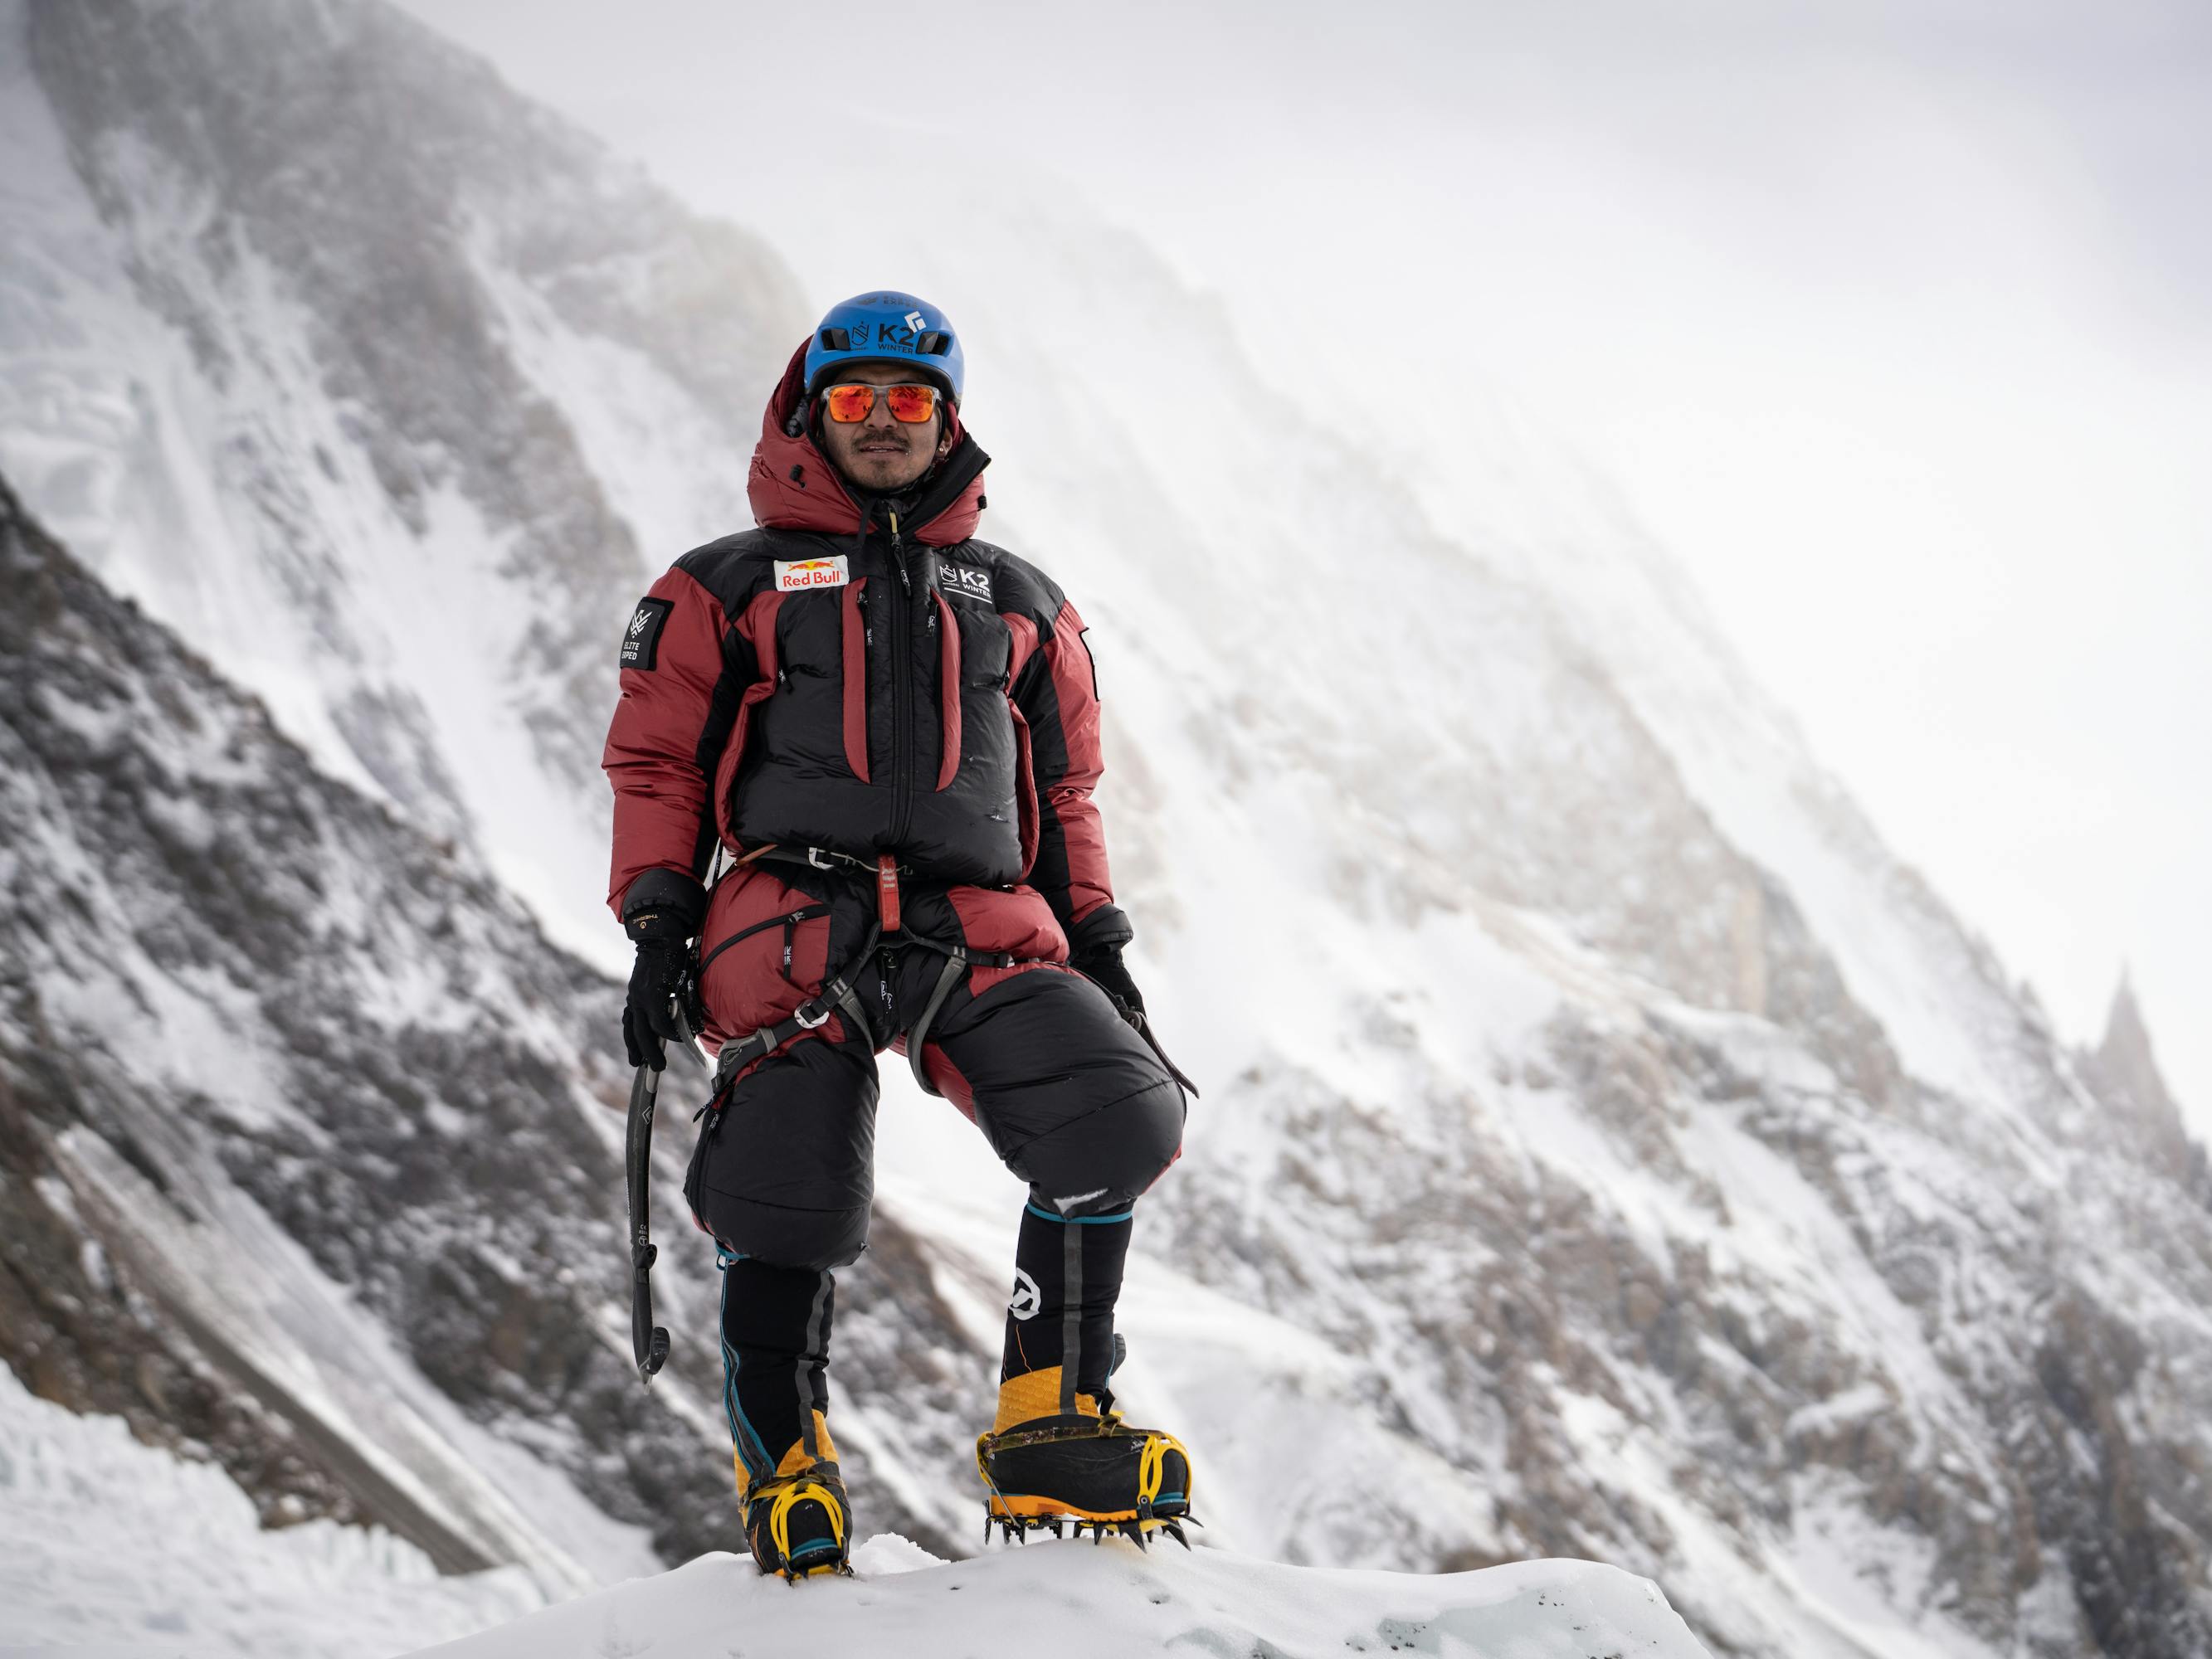 Mingma David Sherpa wears a red and black outfit against a foggy background.